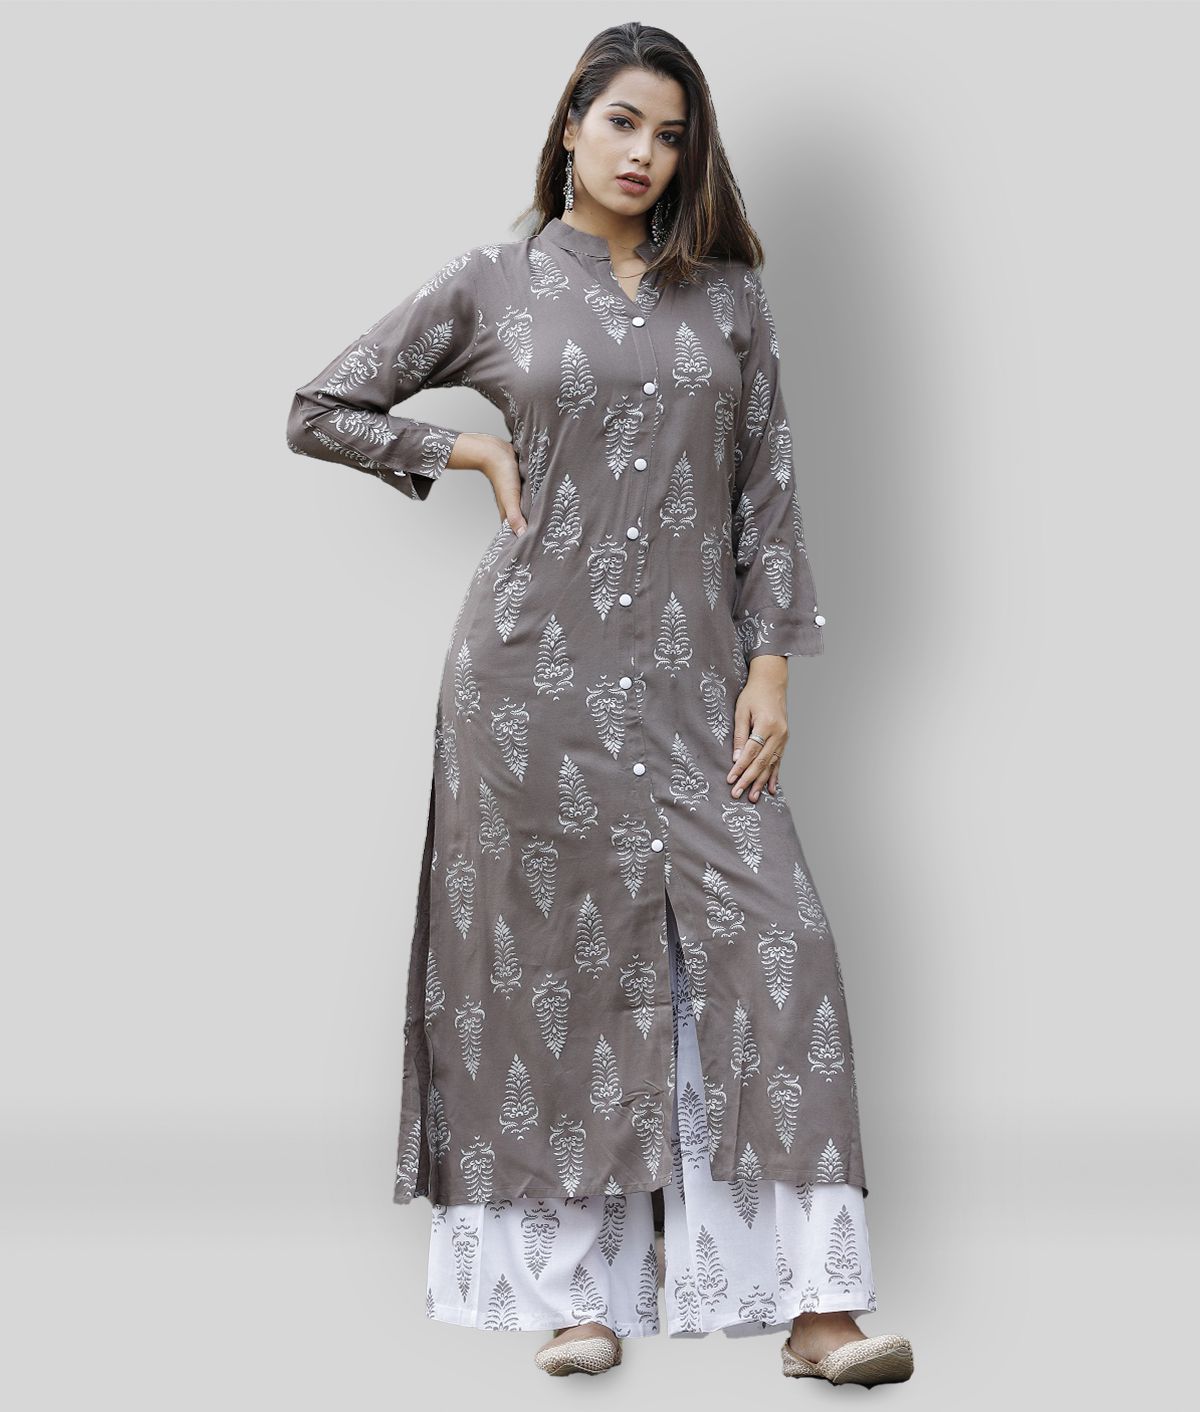     			Lee Moda - Light Grey Straight Rayon Women's Stitched Salwar Suit ( Pack of 1 )